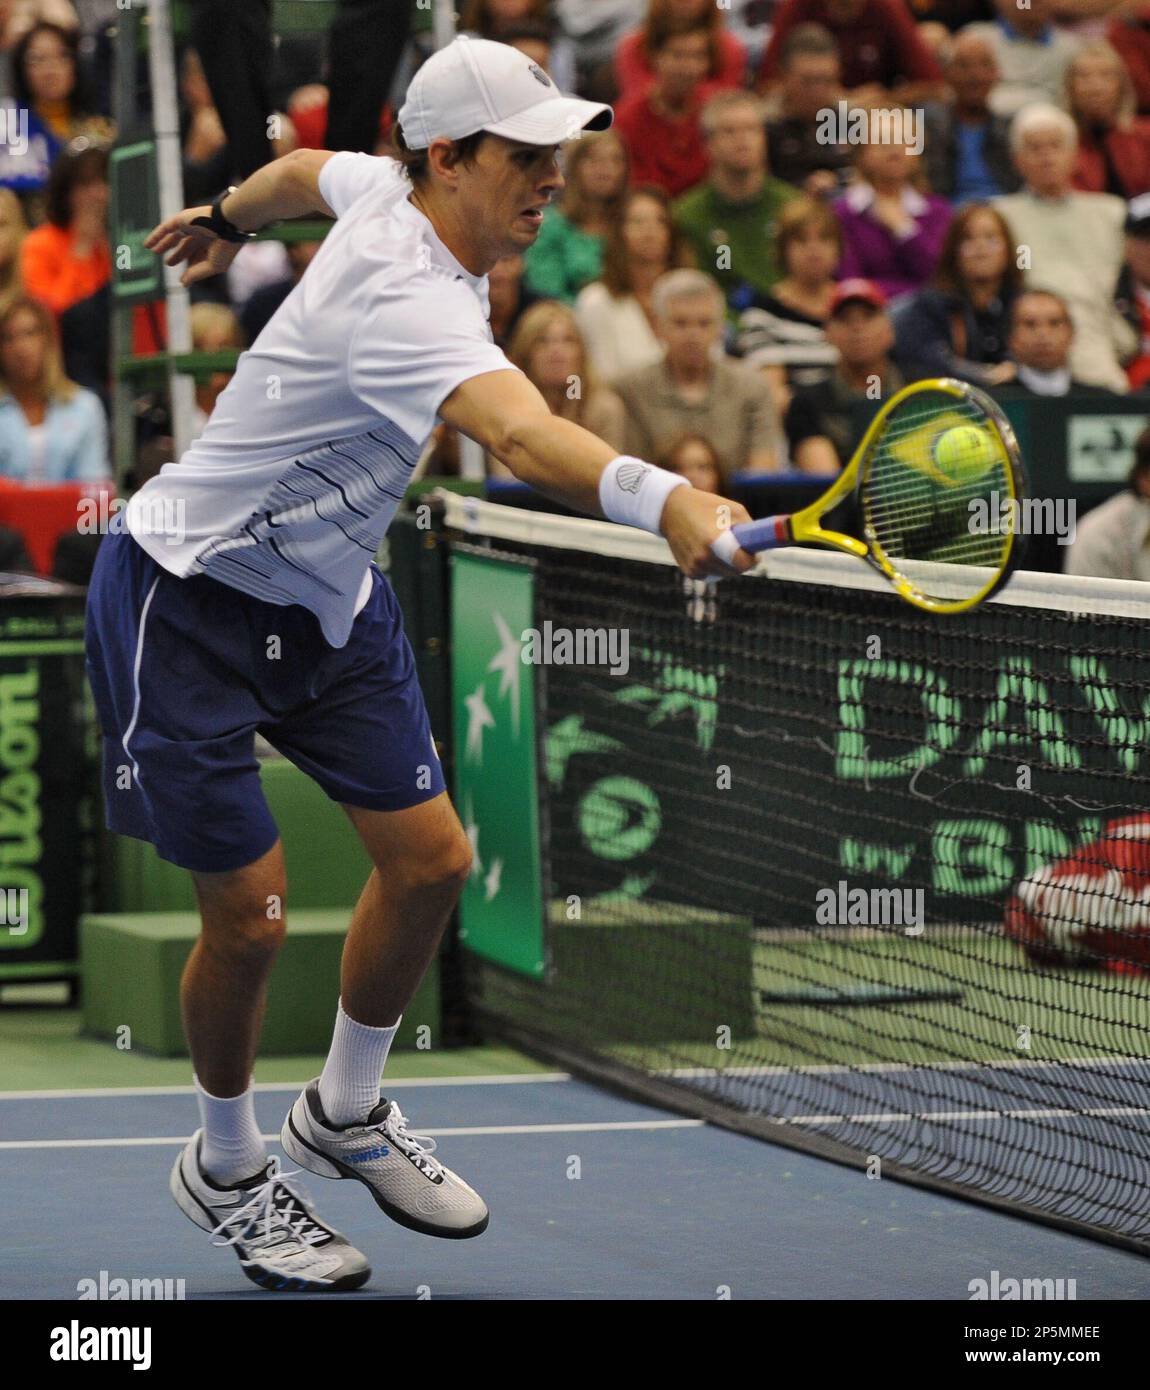 The United States Mike Bryan miss hits a a return at the net against Brazils Marcelo Melo and Bruno Soares during their Davis Cup doubles tennis match in Jacksonville, Fla